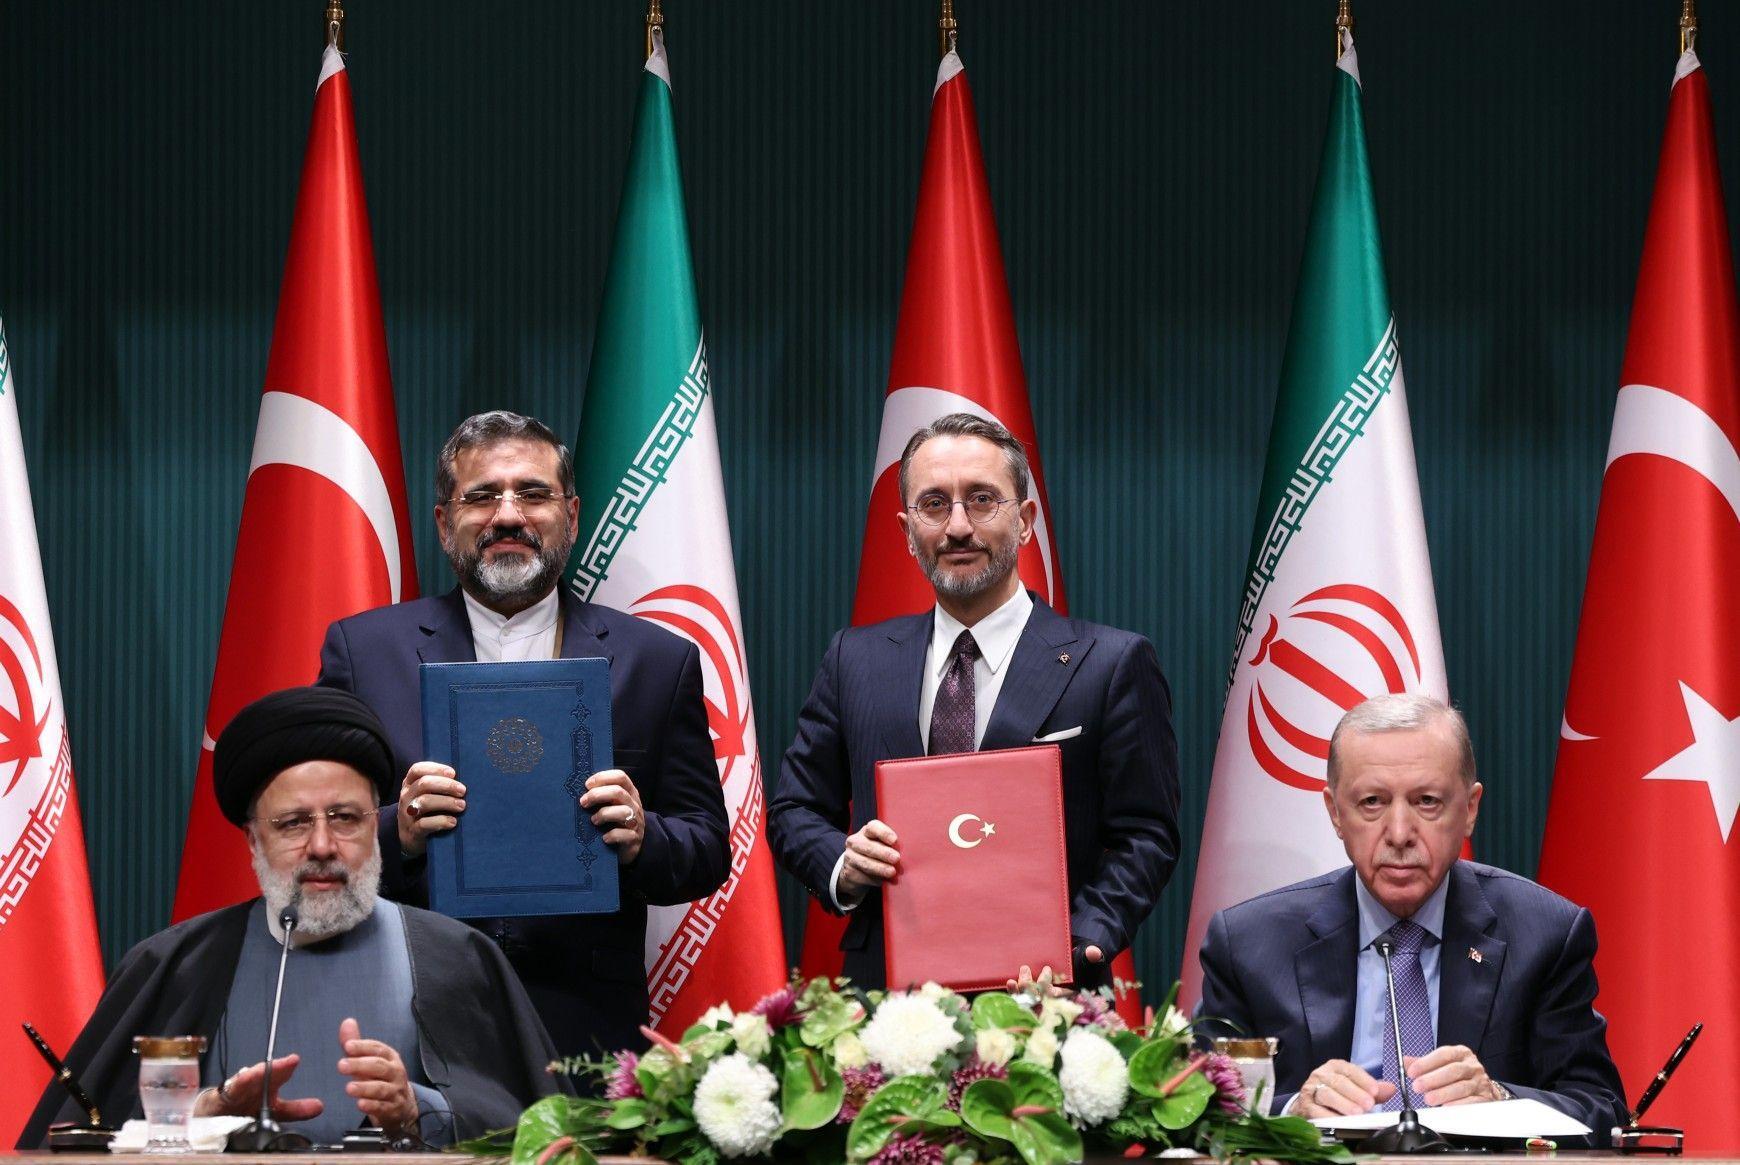 Türkiye and Iran strengthen ties in joint press conference